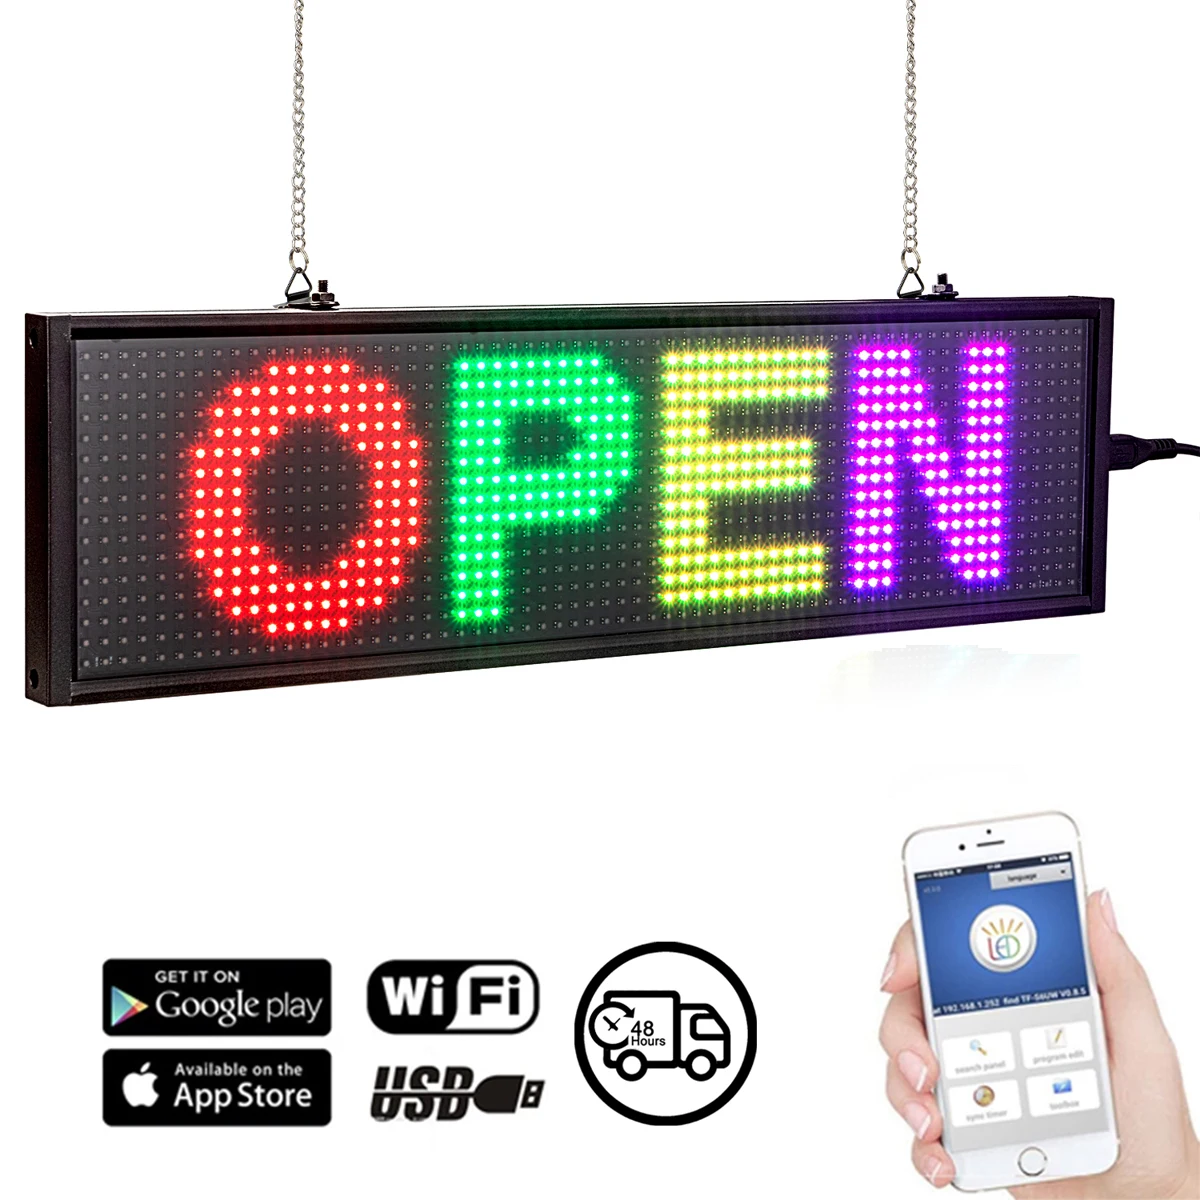 34cm P5 LED Sign Display RGB WiFi Programmable Scrolling Display Time Message Board for Restarant, Bar, Bistro, Cafe with SMD